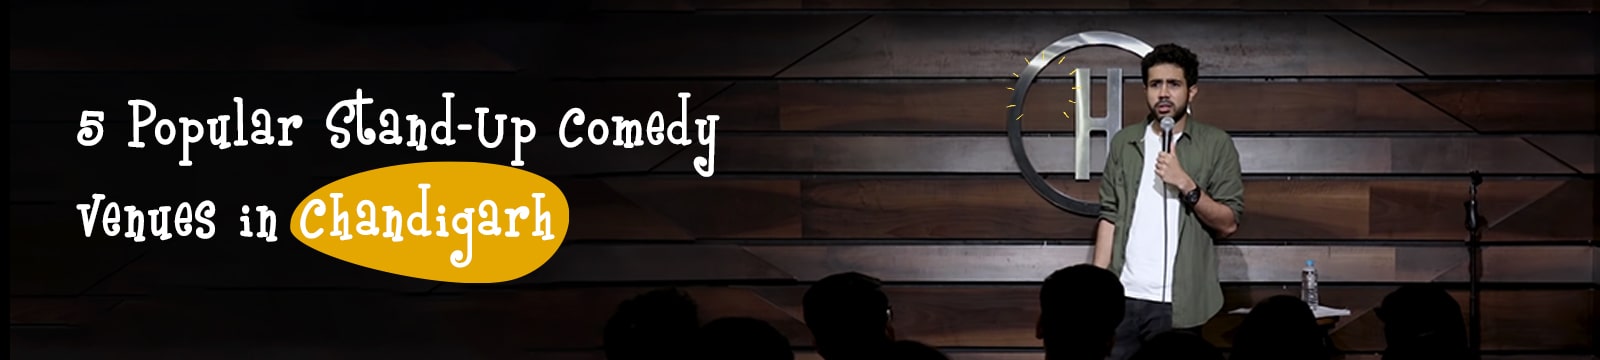 5 Popular Stand-Up Comedy Venues in Chandigarh